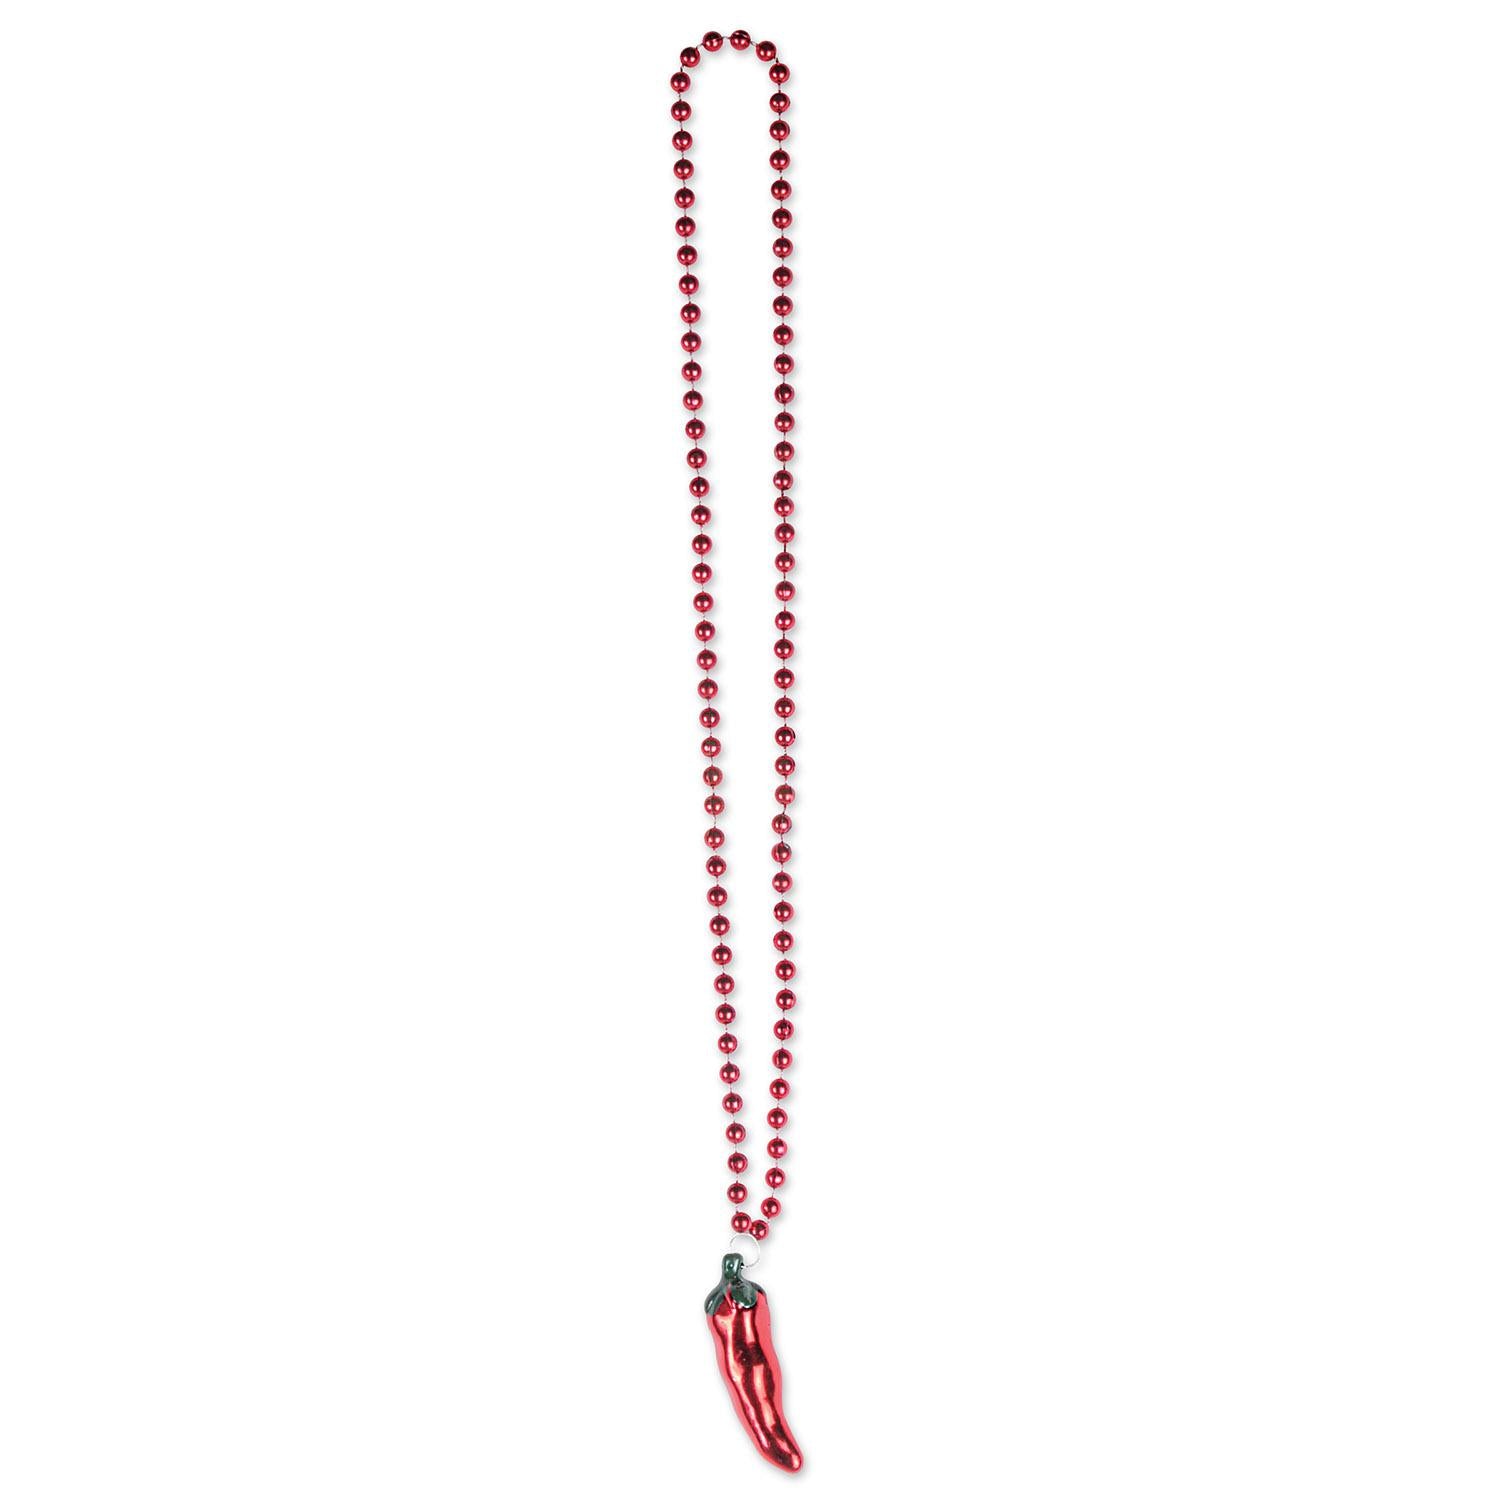 Beistle Fiesta Bead Necklaces with Chili Pepper Medallion